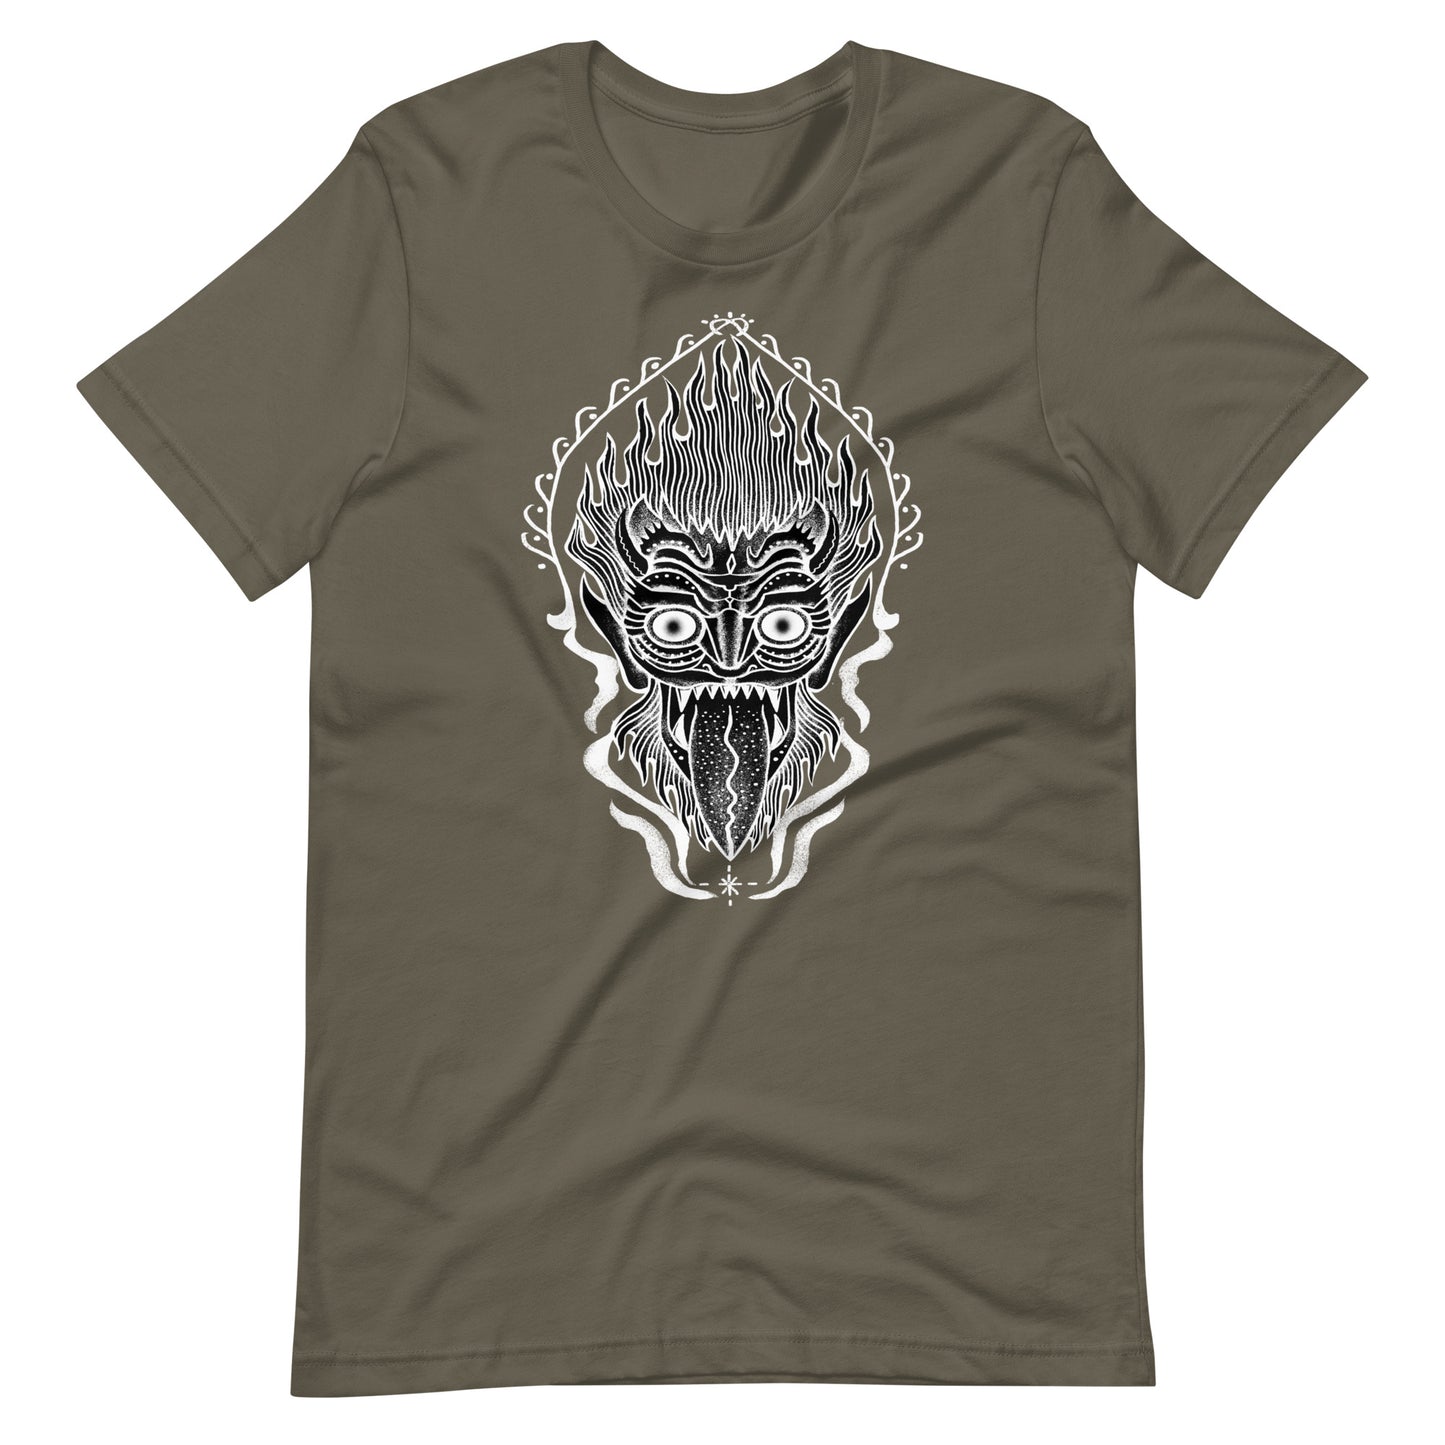 King of Fire - Men's t-shirt - Army Front